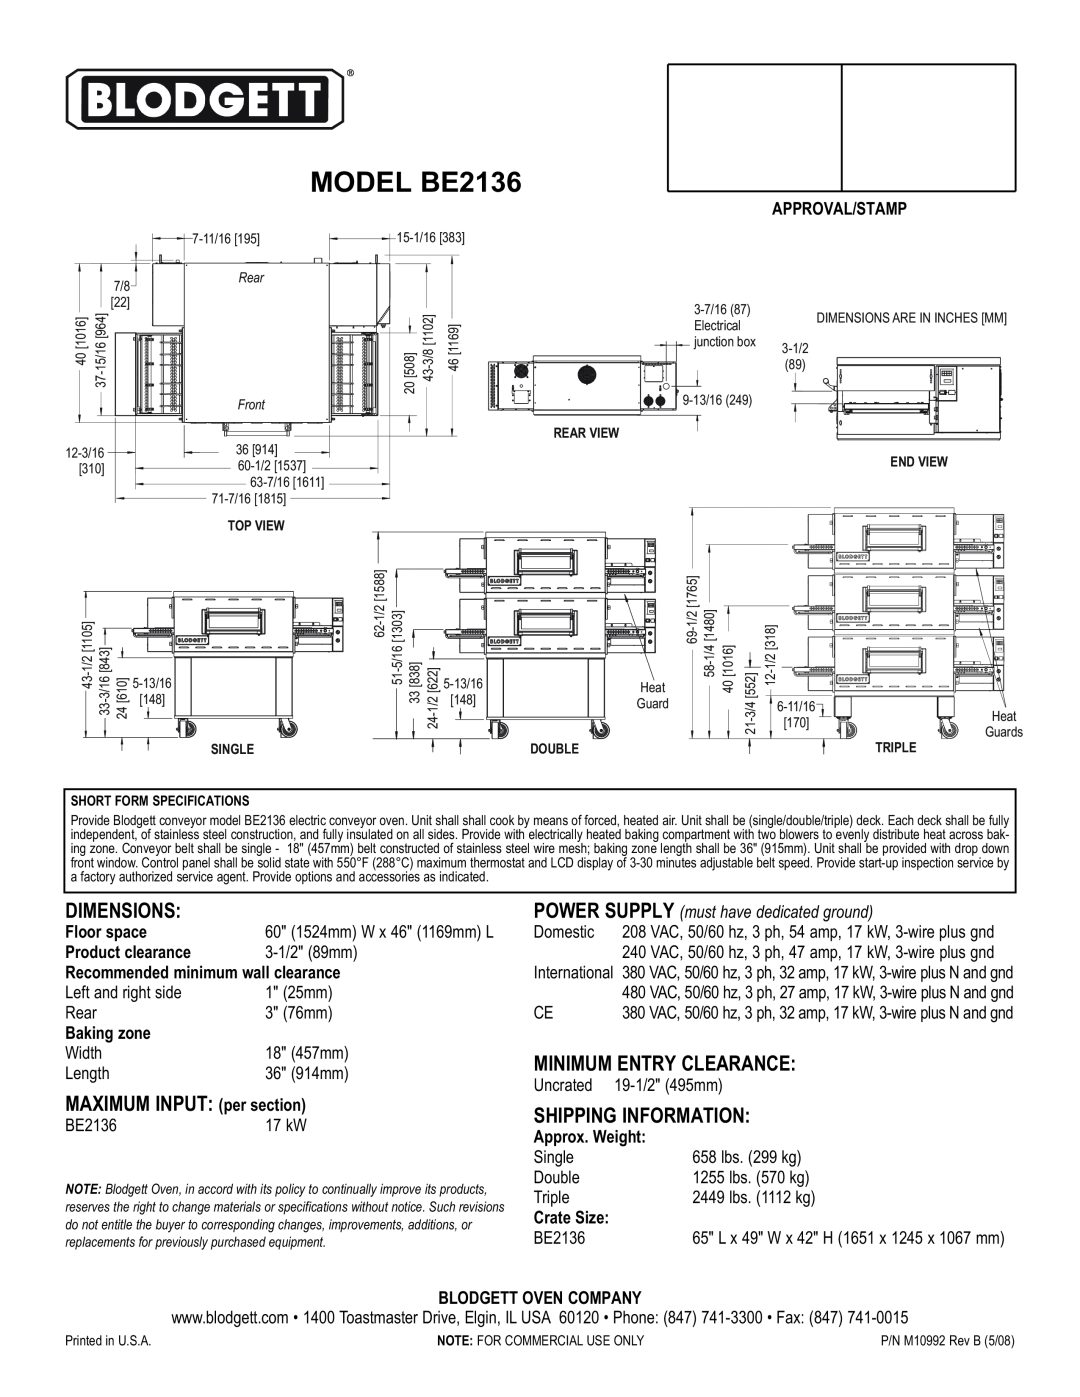 Blodgett MODEL BE2136, Dimensions, MAXIMUM INPUT per section, Minimum Entry Clearance, Shipping Information, Crate Size 